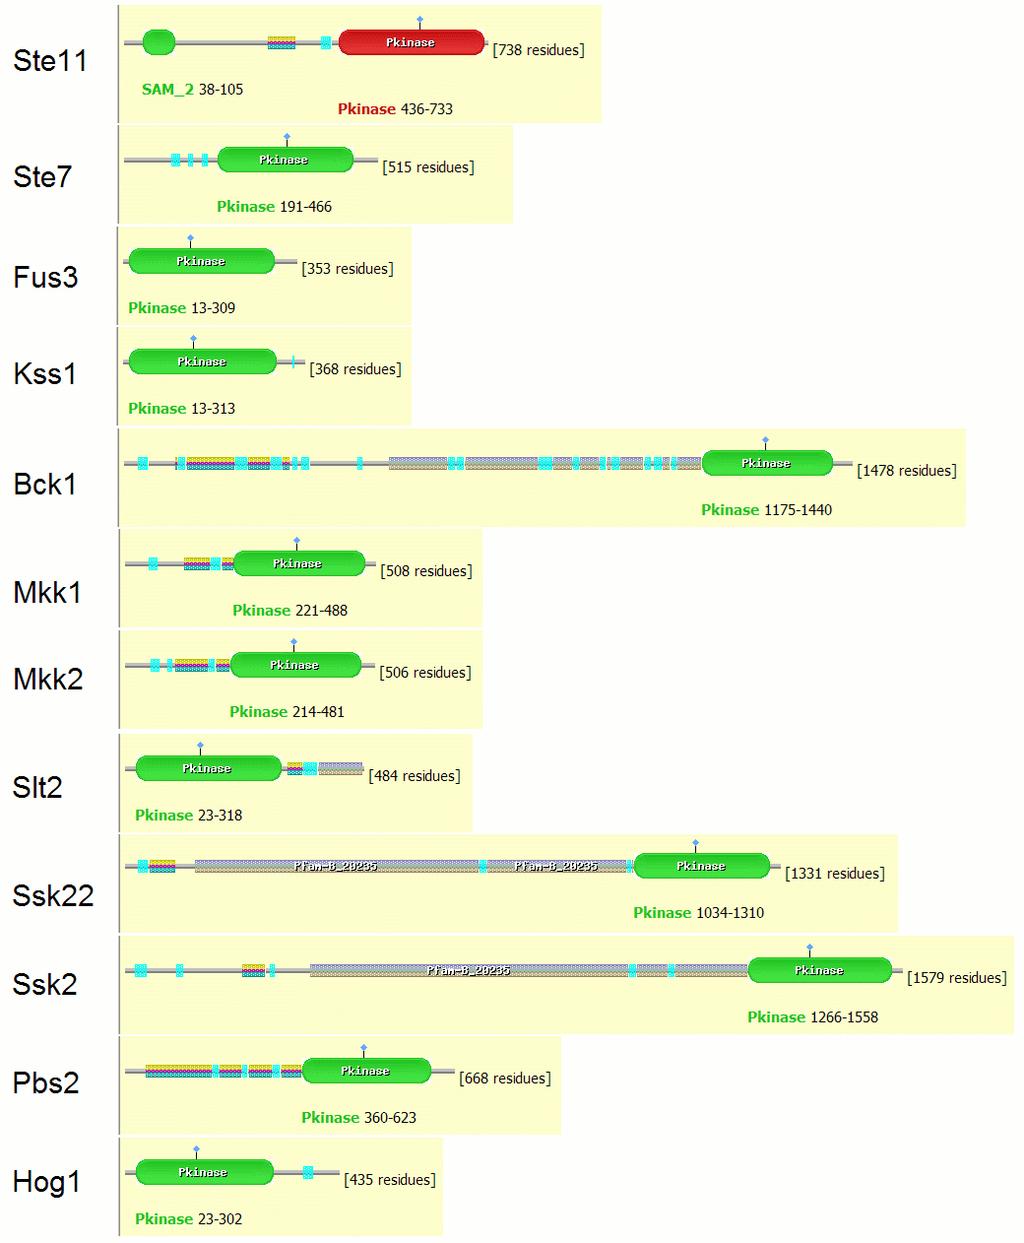 Figure 2.2 Graphical view of domain structures of yeast MAPK kinases based on Pfam annotations.